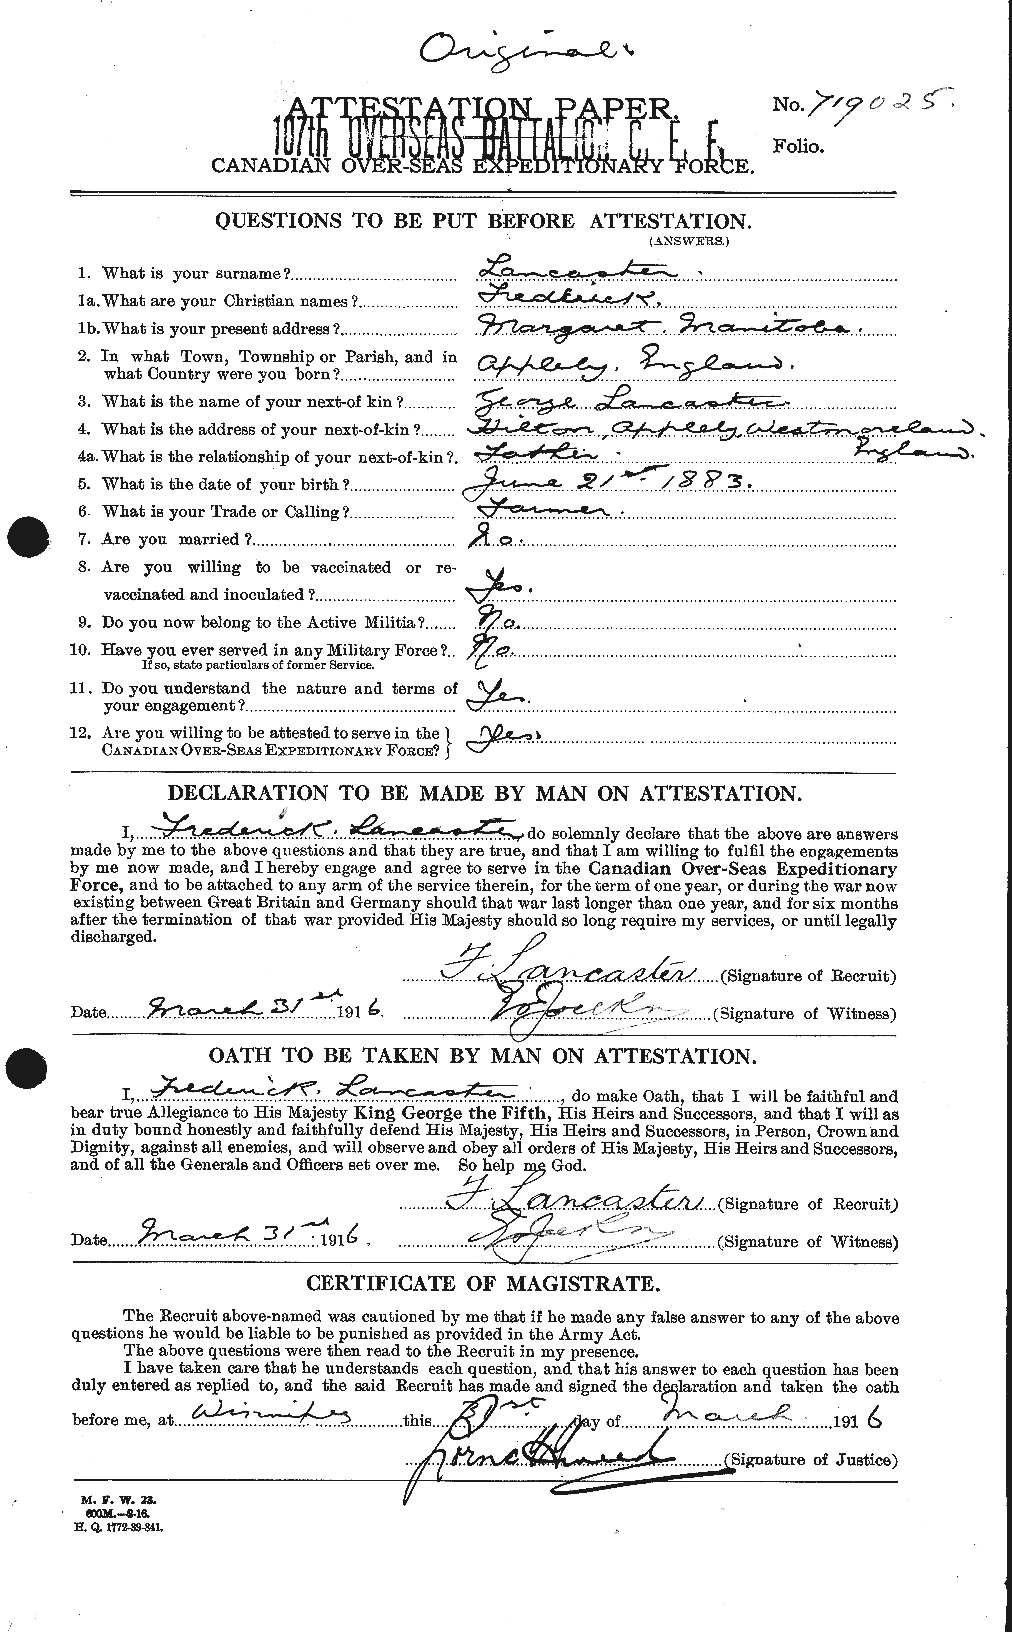 Personnel Records of the First World War - CEF 445411a